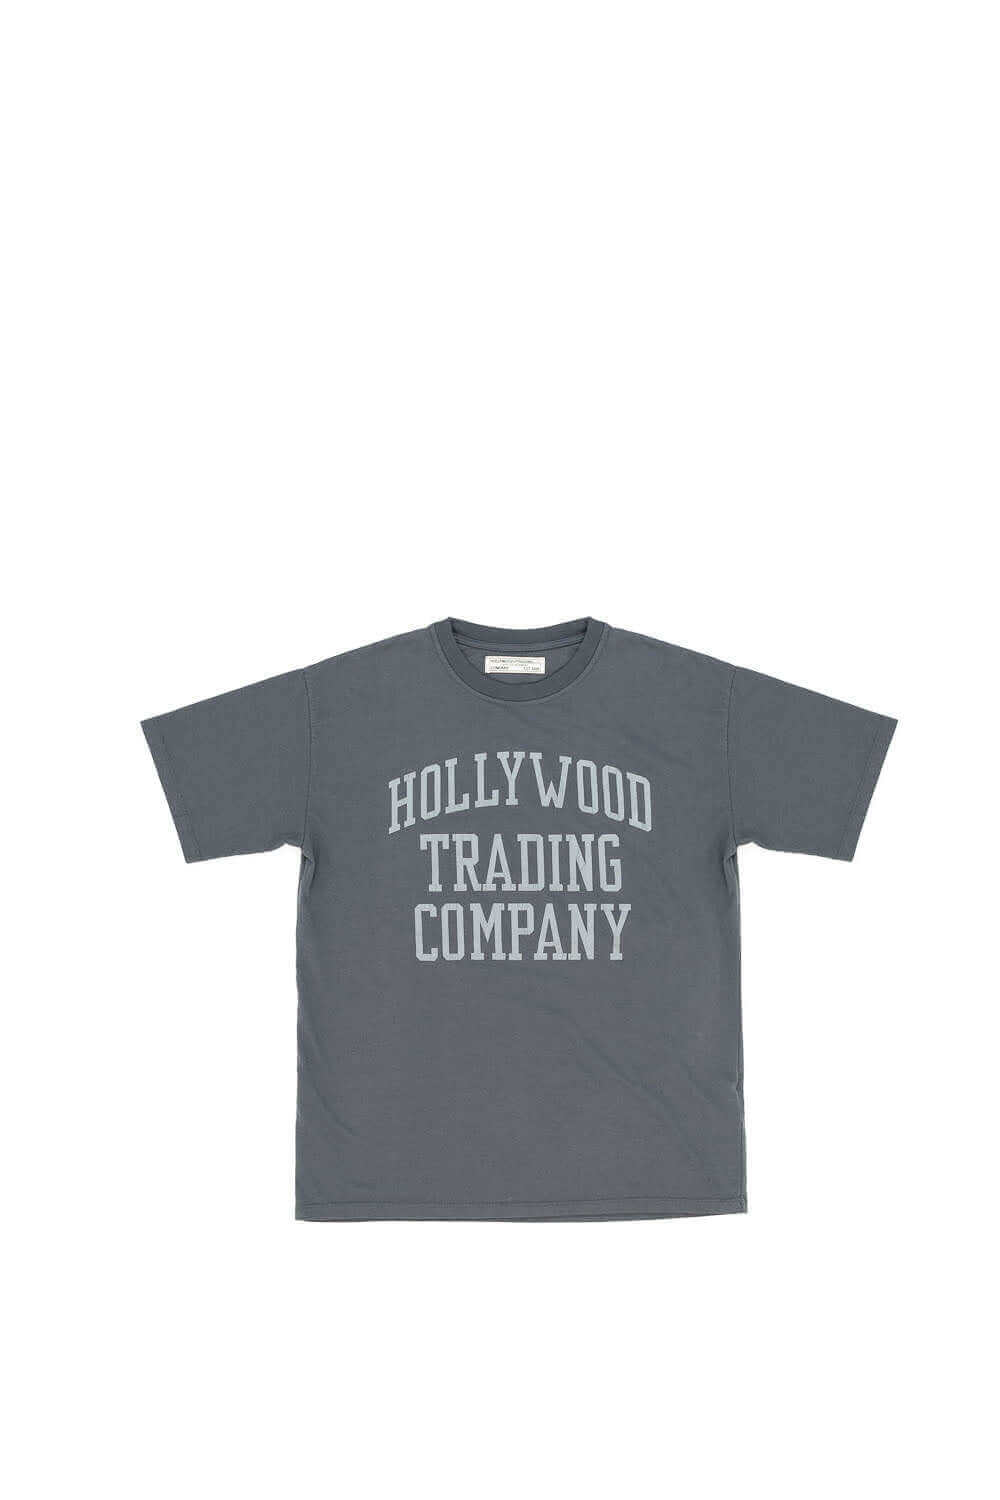 HOLLYWOOD T.C. T-SHIRT Regular fit t-shirt printed on the front. Composition: 100% Cotton HTC LOS ANGELES